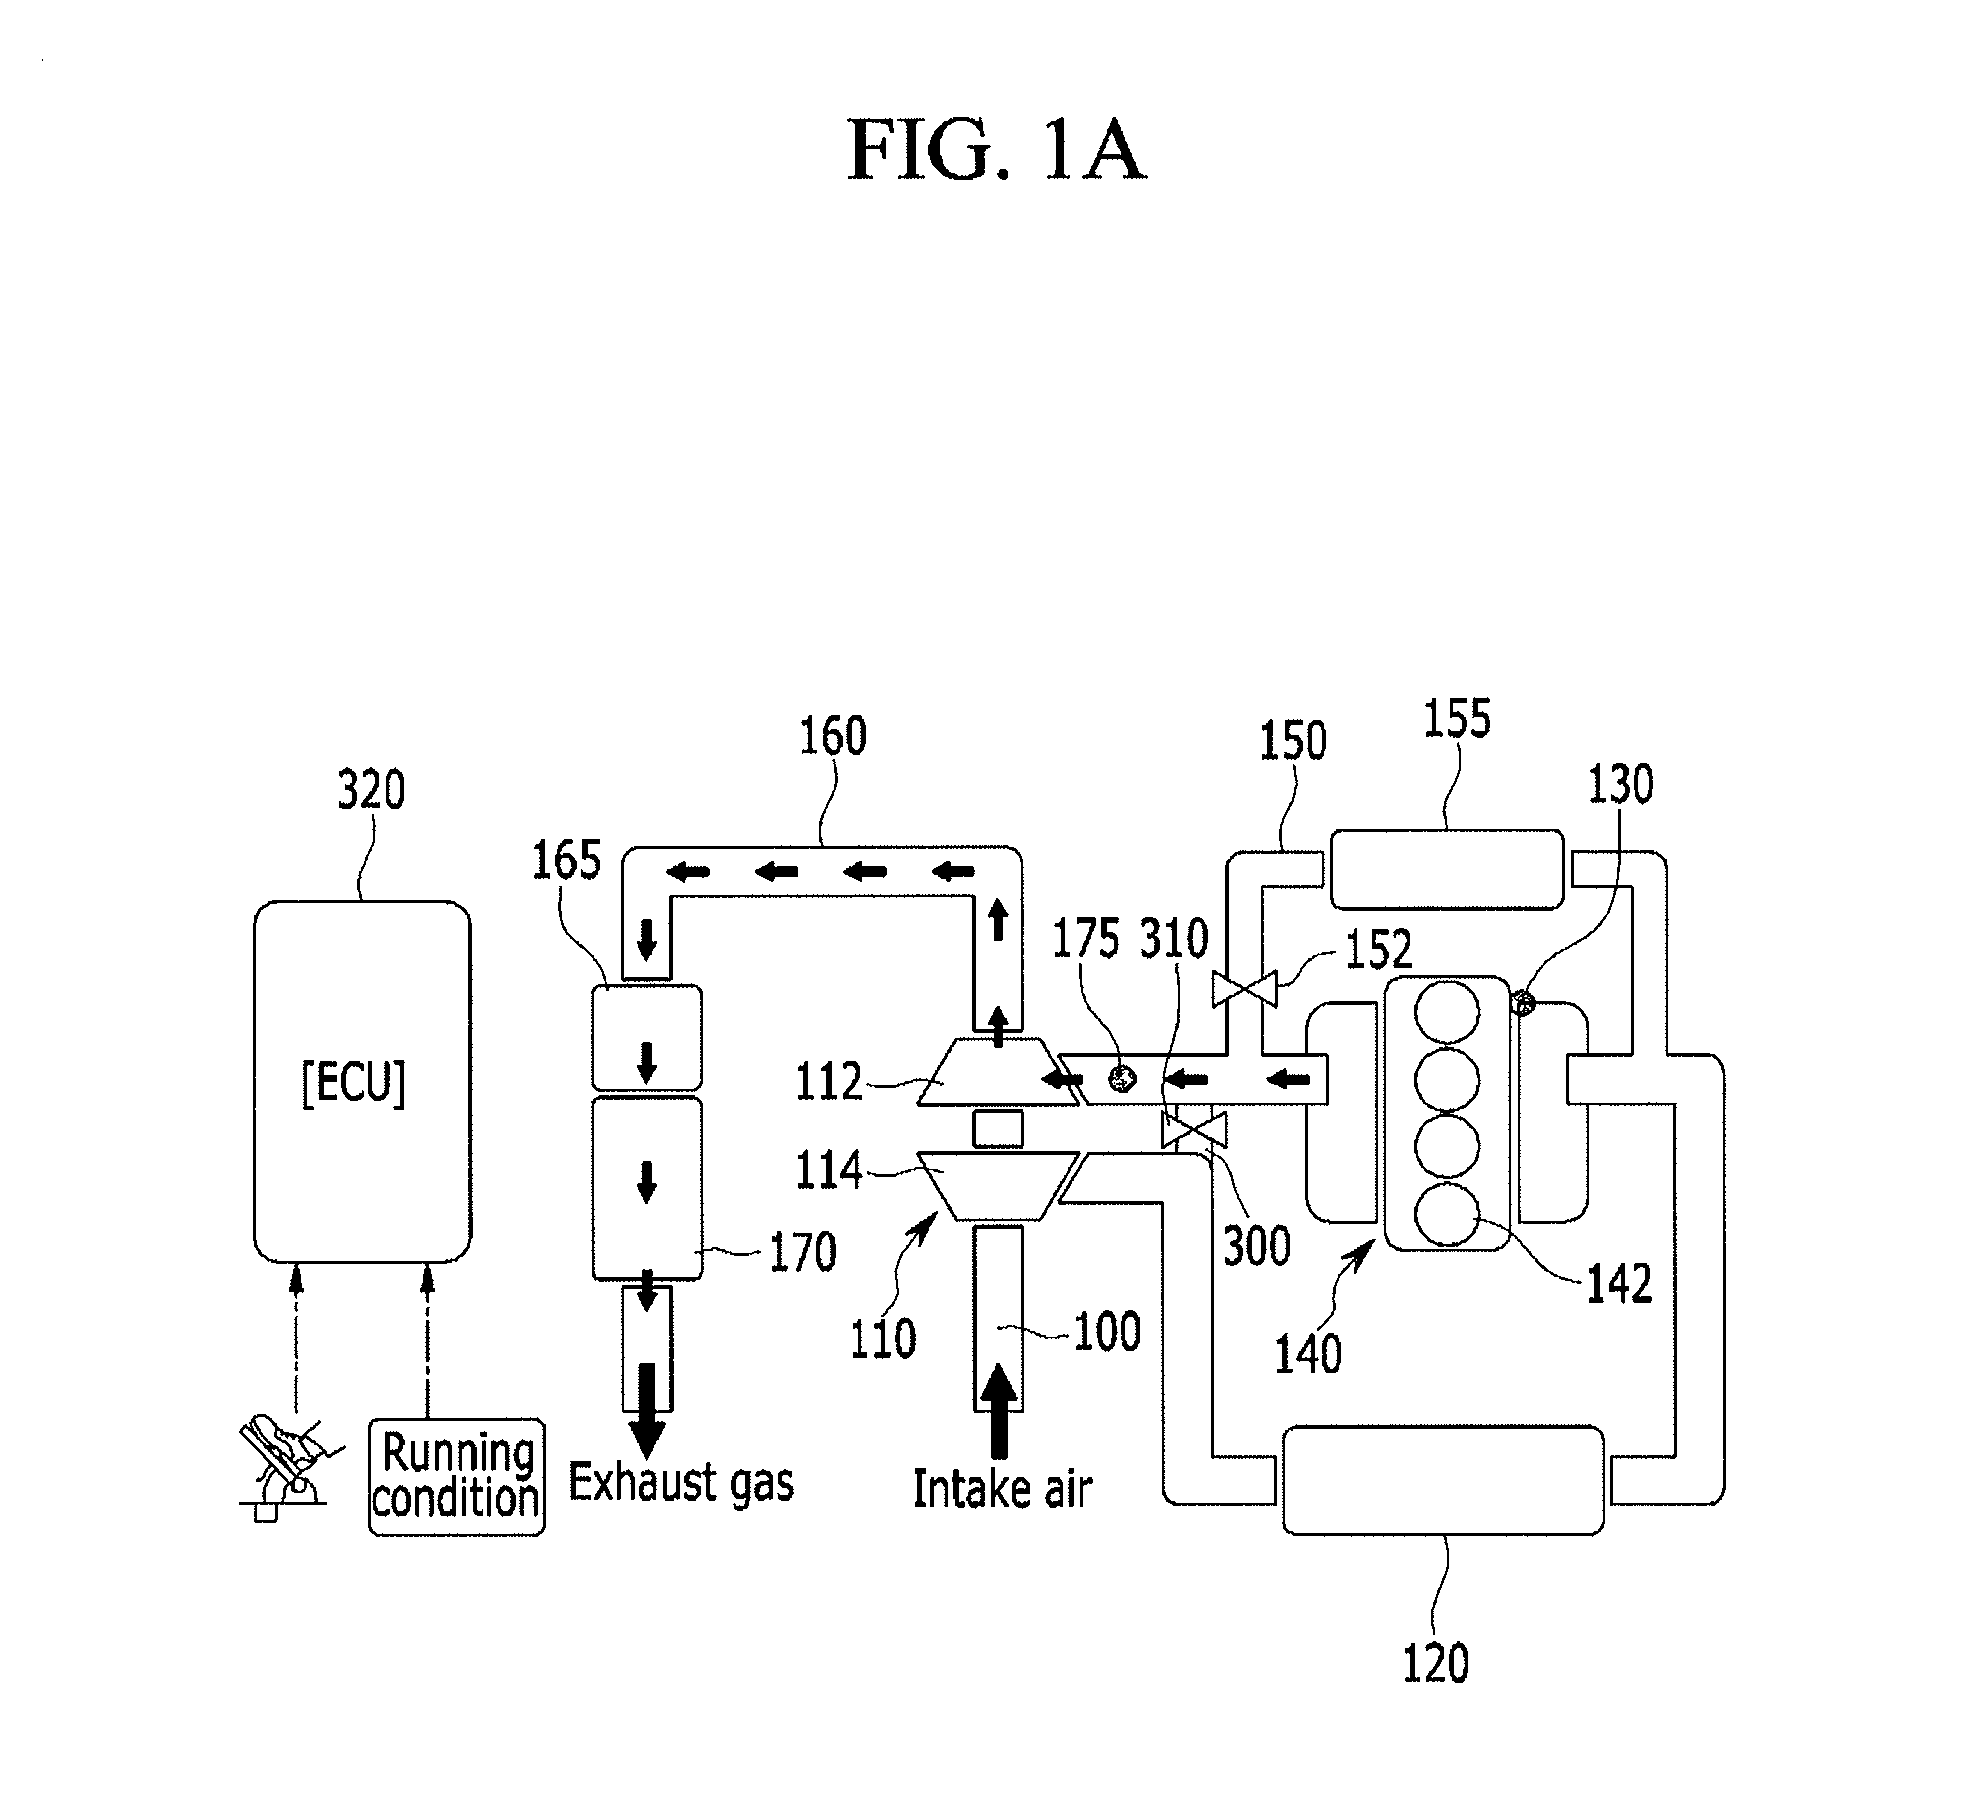 Engine system for controlling flow of exhaust gas